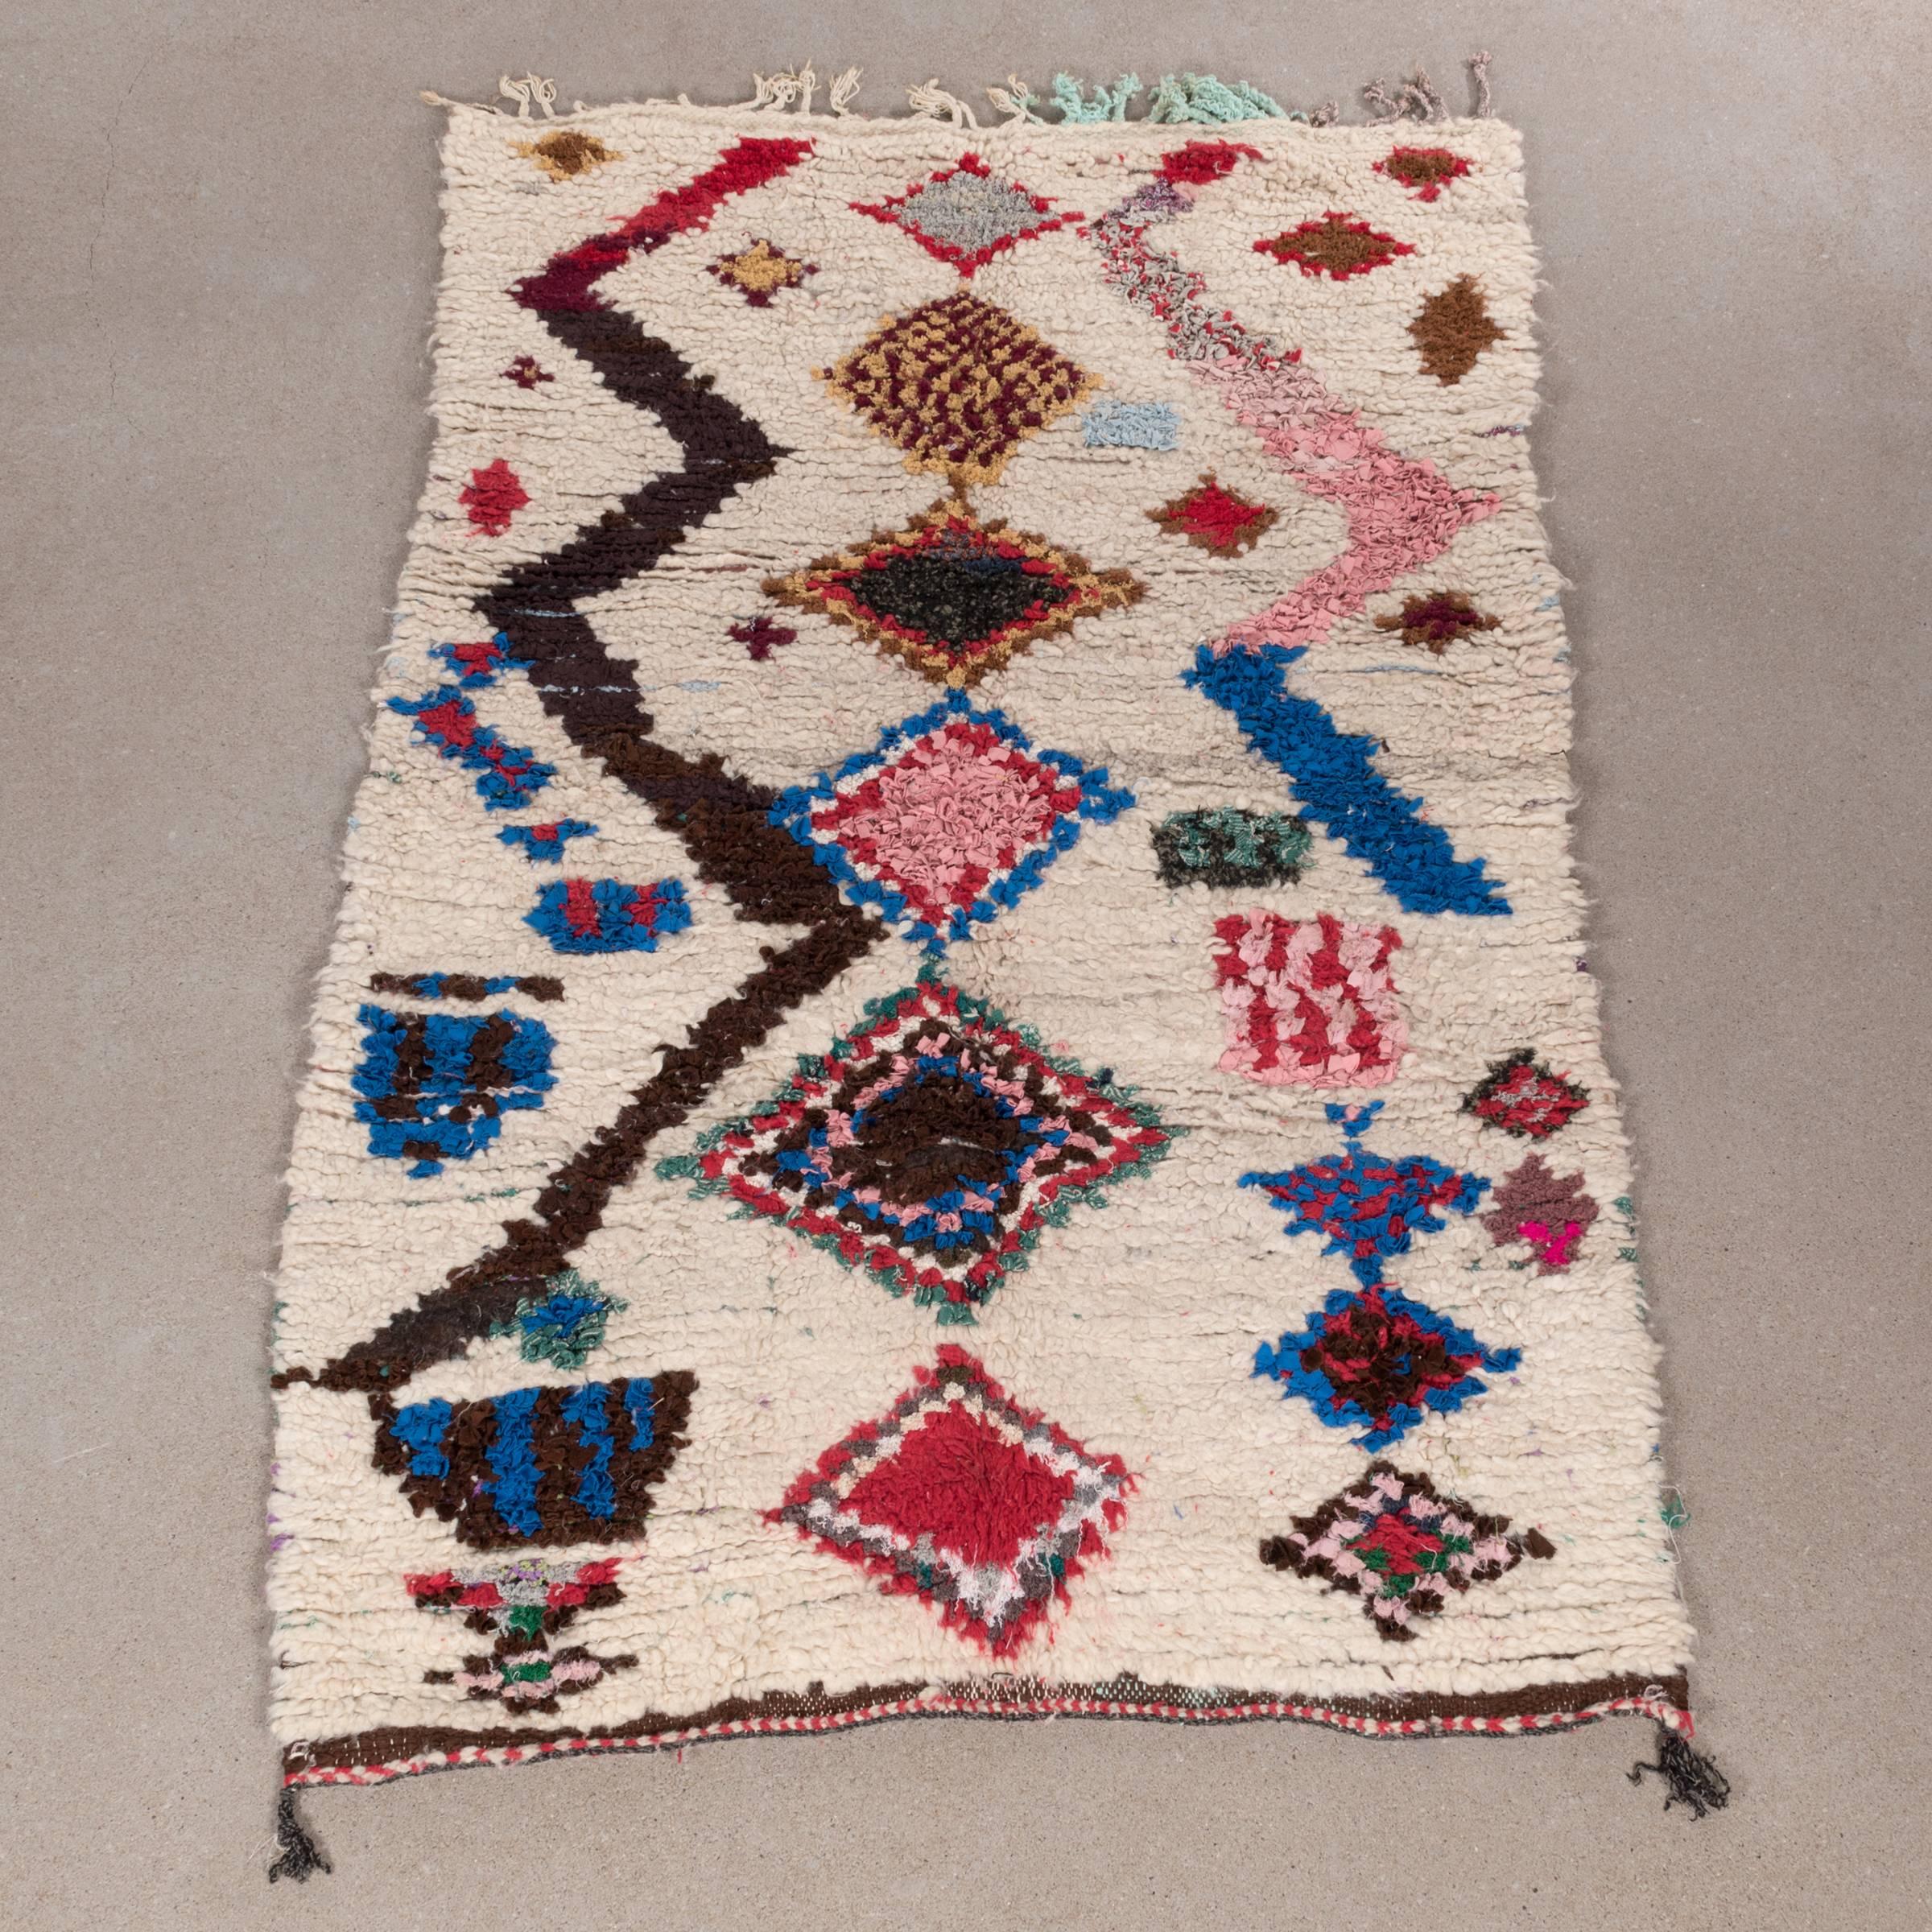 This rug is like a dream of wool! Kind to your feet and bold in color. The slight imperfections make Ourika rugs so charming. They read like a book of history. These colorful, well knotted rugs are entirely handmade and carefully crafted by the